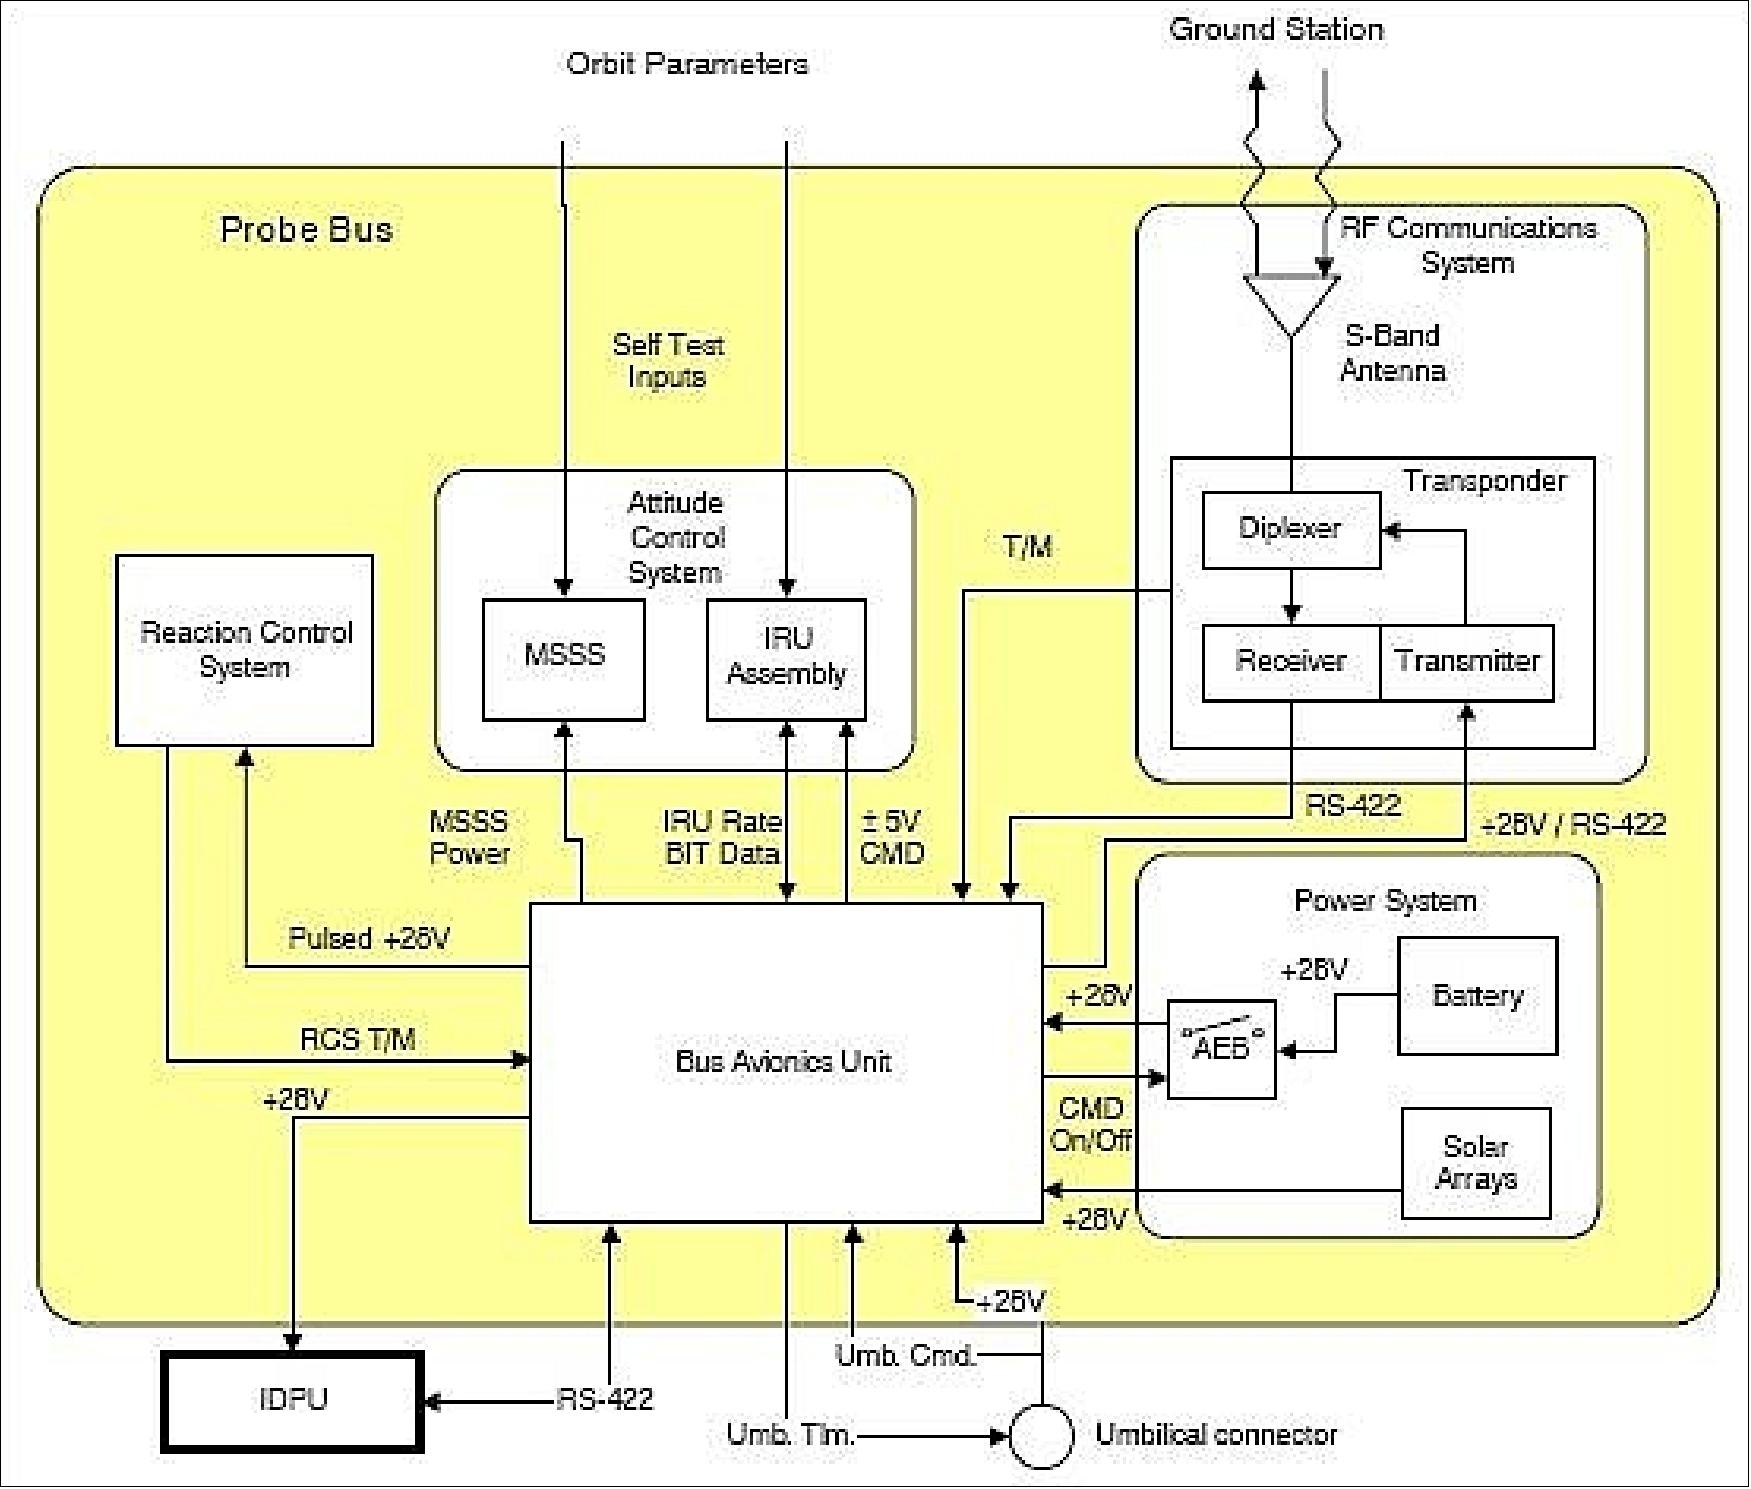 Figure 2: The bus system architecture of THEMIS (image credit: ATK Space)